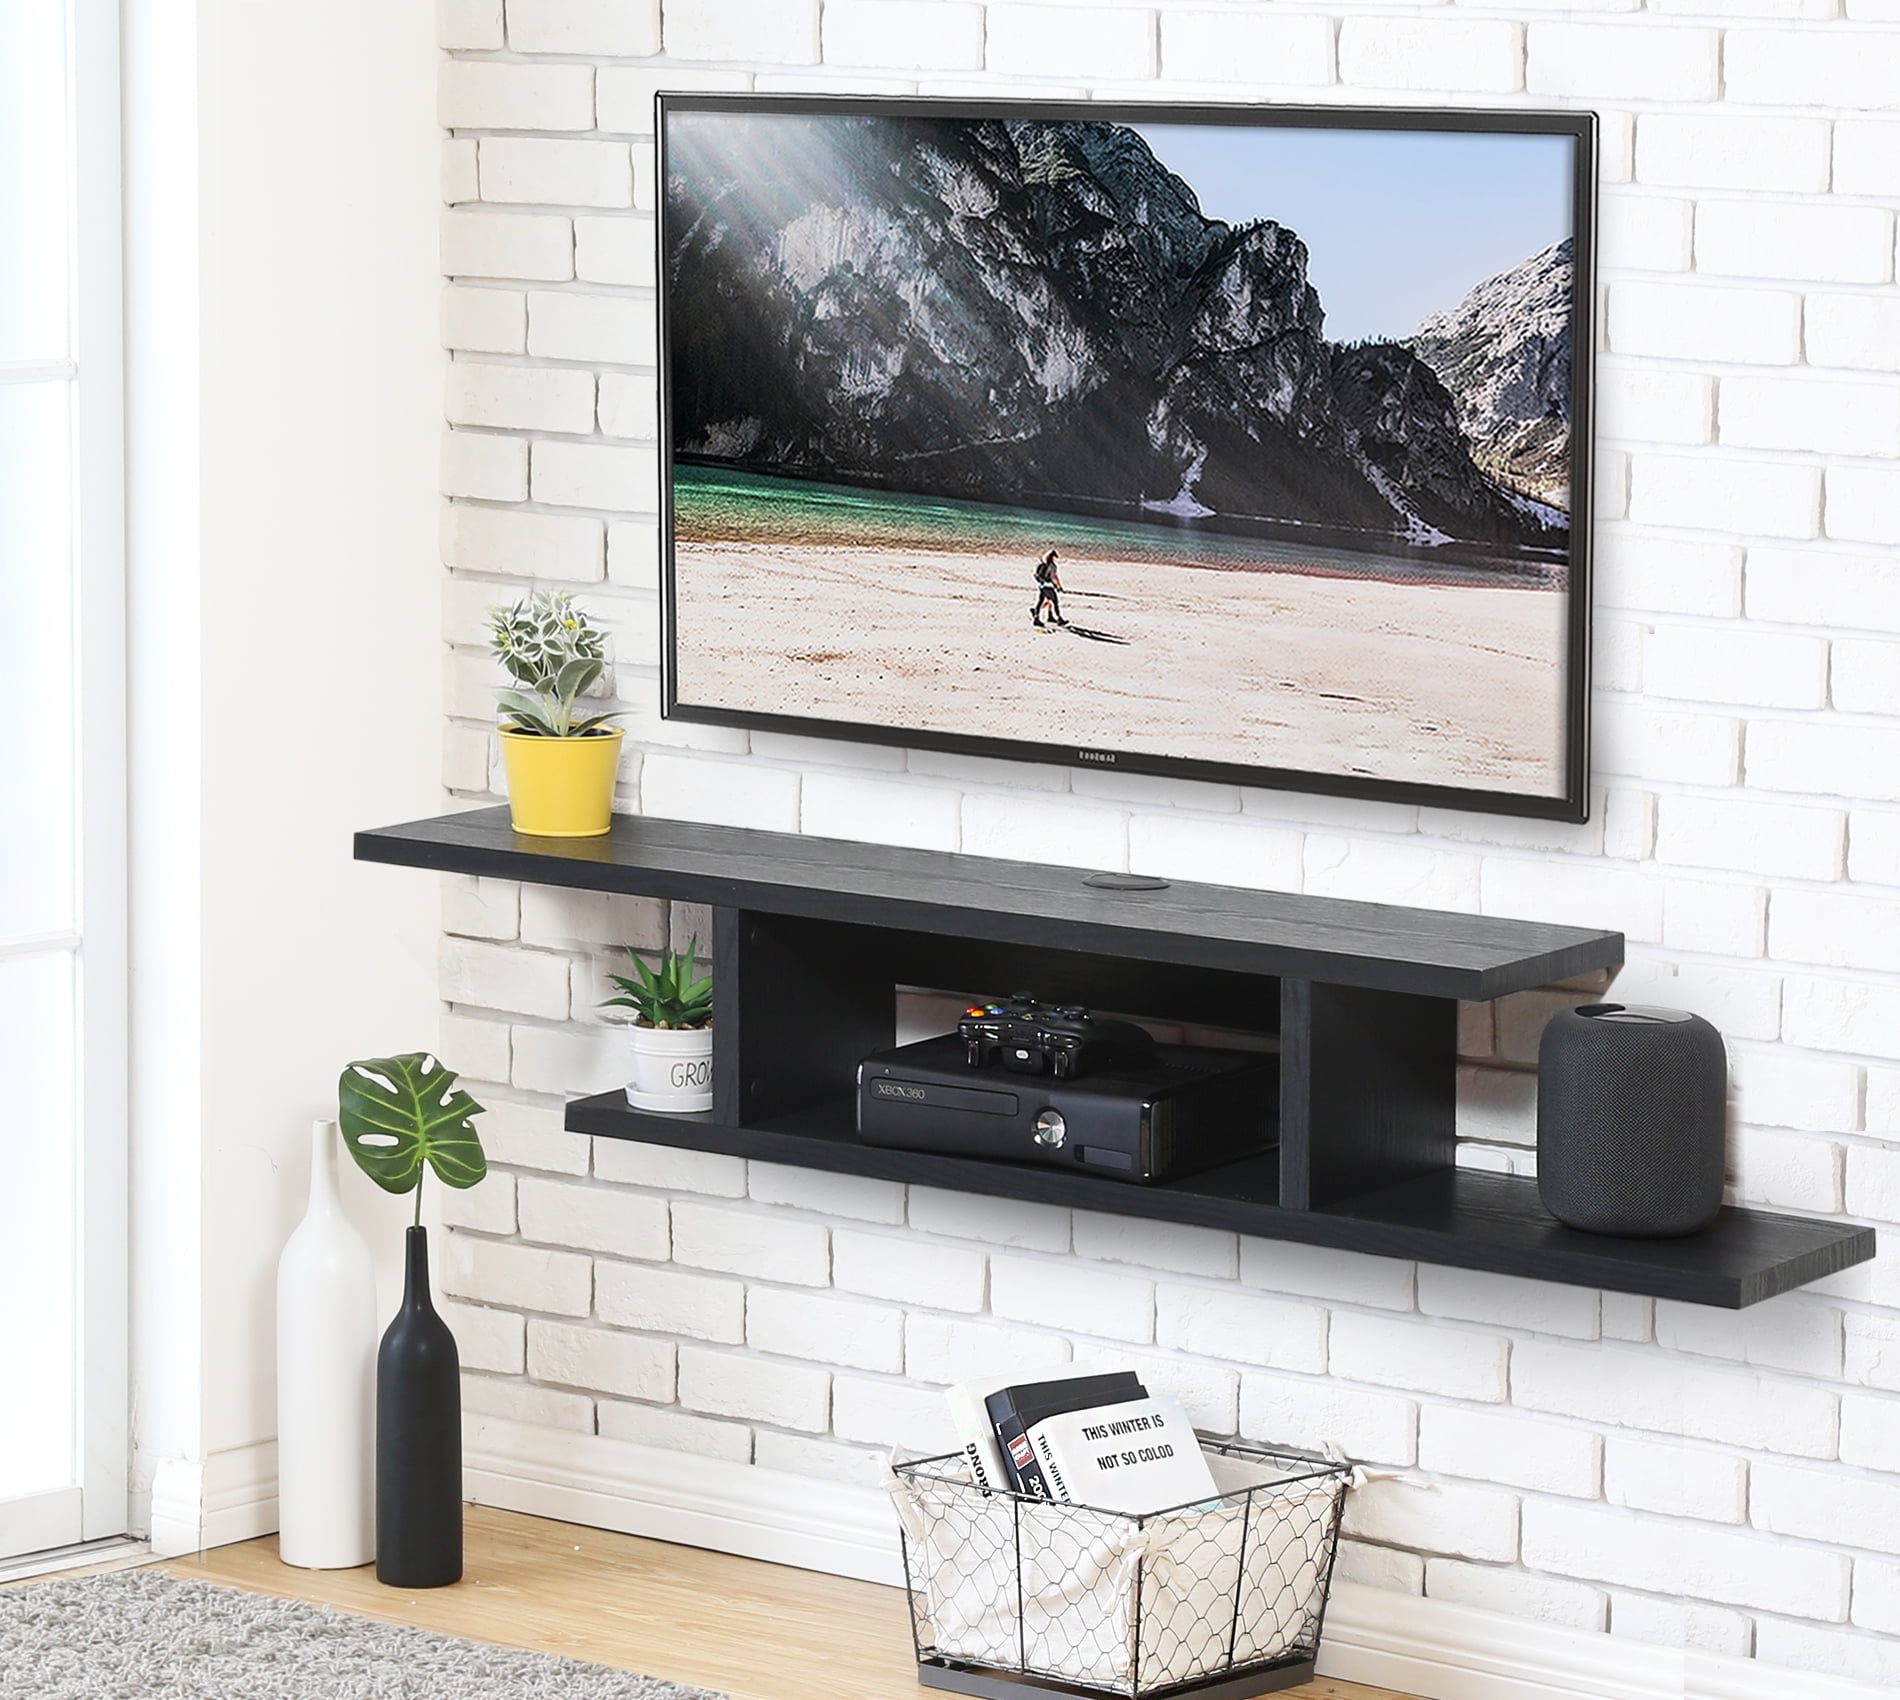 Fitueyes Floating Wall Mounted Tv Console Storage Shelf Modern Tv Stand With Regard To Wall Mounted Floating Tv Stands (Gallery 10 of 20)